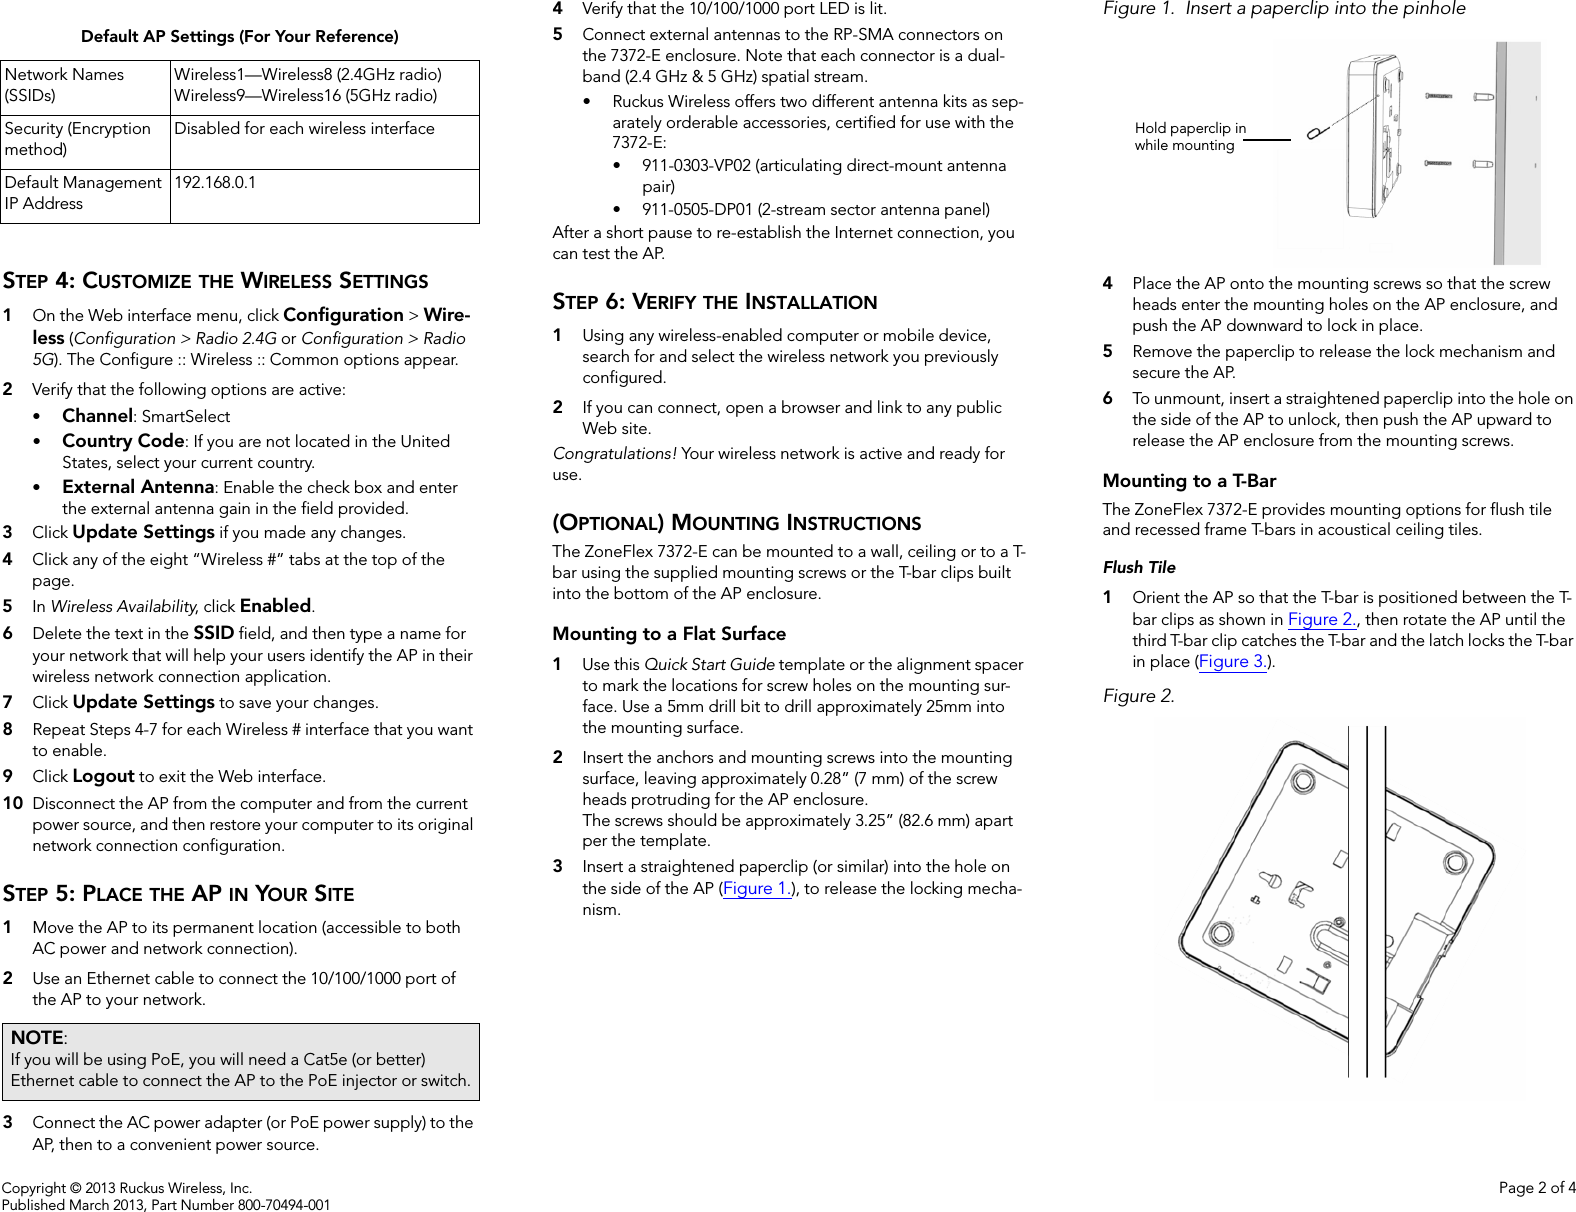 Copyright © 2013 Ruckus Wireless, Inc. Page 2 of 4Published March 2013, Part Number 800-70494-001STEP 4: CUSTOMIZE THE WIRELESS SETTINGS1On the Web interface menu, click Configuration &gt; Wire-less (Configuration &gt; Radio 2.4G or Configuration &gt; Radio 5G). The Configure :: Wireless :: Common options appear. 2Verify that the following options are active:•Channel: SmartSelect•Country Code: If you are not located in the United States, select your current country. •External Antenna: Enable the check box and enter the external antenna gain in the field provided. 3Click Update Settings if you made any changes.4Click any of the eight “Wireless #” tabs at the top of the page. 5In Wireless Availability, click Enabled.6Delete the text in the SSID field, and then type a name for your network that will help your users identify the AP in their wireless network connection application.7Click Update Settings to save your changes.8Repeat Steps 4-7 for each Wireless # interface that you want to enable. 9Click Logout to exit the Web interface.10 Disconnect the AP from the computer and from the current power source, and then restore your computer to its original network connection configuration. STEP 5: PLACE THE AP IN YOUR SITE 1Move the AP to its permanent location (accessible to both AC power and network connection). 2Use an Ethernet cable to connect the 10/100/1000 port of the AP to your network.3Connect the AC power adapter (or PoE power supply) to the AP, then to a convenient power source.4Verify that the 10/100/1000 port LED is lit.5Connect external antennas to the RP-SMA connectors on the 7372-E enclosure. Note that each connector is a dual-band (2.4 GHz &amp; 5 GHz) spatial stream.• Ruckus Wireless offers two different antenna kits as sep-arately orderable accessories, certified for use with the 7372-E:• 911-0303-VP02 (articulating direct-mount antenna pair)• 911-0505-DP01 (2-stream sector antenna panel)After a short pause to re-establish the Internet connection, you can test the AP. STEP 6: VERIFY THE INSTALLATION1Using any wireless-enabled computer or mobile device, search for and select the wireless network you previously configured. 2If you can connect, open a browser and link to any public Web site.Congratulations! Your wireless network is active and ready for use. (OPTIONAL) MOUNTING INSTRUCTIONSThe ZoneFlex 7372-E can be mounted to a wall, ceiling or to a T-bar using the supplied mounting screws or the T-bar clips built into the bottom of the AP enclosure. Mounting to a Flat Surface1Use this Quick Start Guide template or the alignment spacer to mark the locations for screw holes on the mounting sur-face. Use a 5mm drill bit to drill approximately 25mm into the mounting surface. 2Insert the anchors and mounting screws into the mounting surface, leaving approximately 0.28” (7 mm) of the screw heads protruding for the AP enclosure. The screws should be approximately 3.25” (82.6 mm) apart per the template.3Insert a straightened paperclip (or similar) into the hole on the side of the AP (Figure 1.), to release the locking mecha-nism. Figure 1. Insert a paperclip into the pinhole4Place the AP onto the mounting screws so that the screw heads enter the mounting holes on the AP enclosure, and push the AP downward to lock in place. 5Remove the paperclip to release the lock mechanism and secure the AP.6To unmount, insert a straightened paperclip into the hole on the side of the AP to unlock, then push the AP upward to release the AP enclosure from the mounting screws. Mounting to a T-BarThe ZoneFlex 7372-E provides mounting options for flush tile and recessed frame T-bars in acoustical ceiling tiles. Flush Tile1Orient the AP so that the T-bar is positioned between the T-bar clips as shown in Figure 2., then rotate the AP until the third T-bar clip catches the T-bar and the latch locks the T-bar in place (Figure 3.).Figure 2.Default AP Settings (For Your Reference)Network Names (SSIDs)Wireless1—Wireless8 (2.4GHz radio)Wireless9—Wireless16 (5GHz radio)Security (Encryption method)Disabled for each wireless interfaceDefault Management IP Address192.168.0.1NOTE: If you will be using PoE, you will need a Cat5e (or better) Ethernet cable to connect the AP to the PoE injector or switch.Hold paperclip inwhile mounting